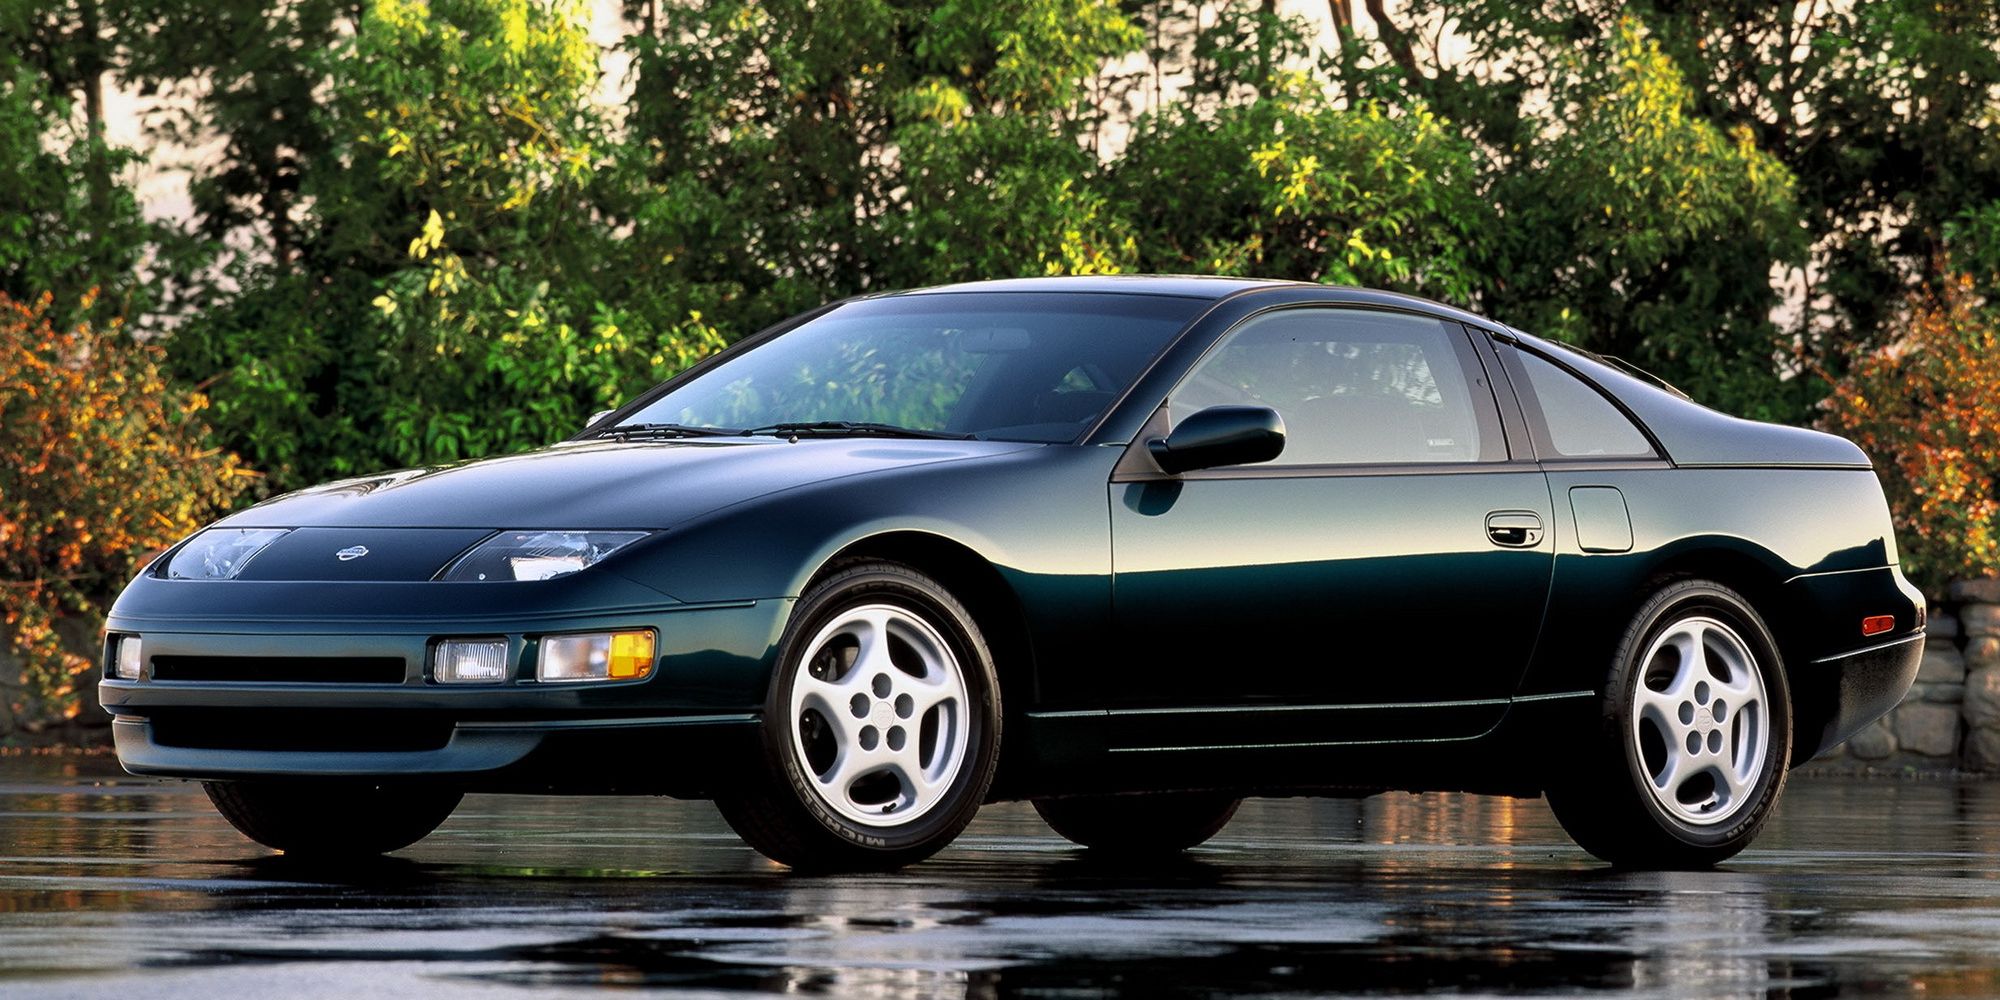 Front 3/4 view of a dark green 300ZX